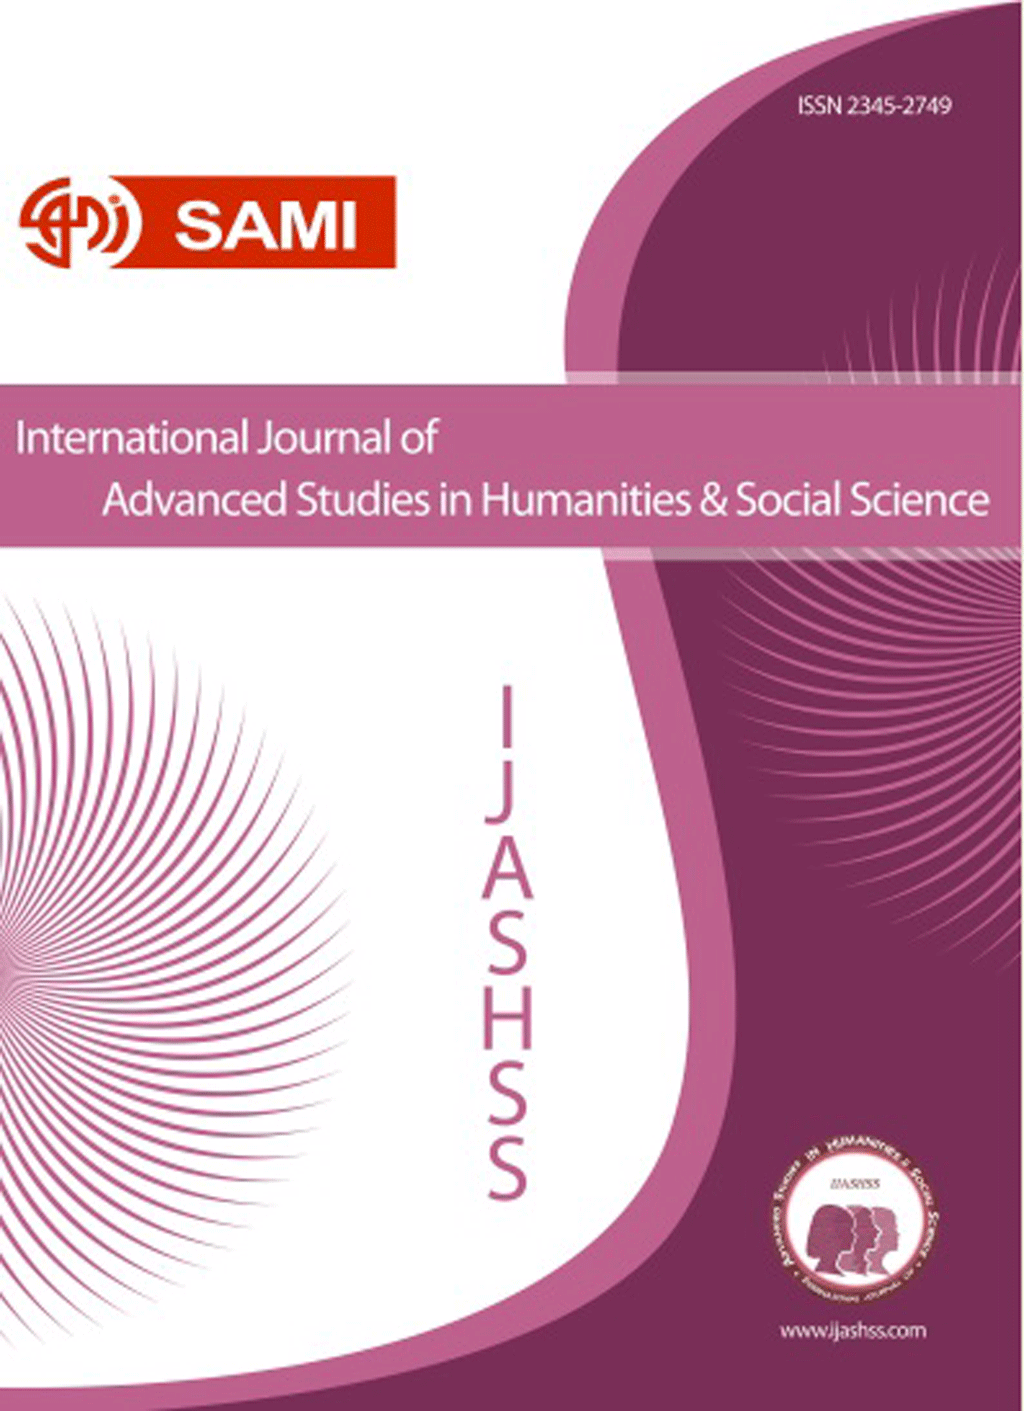 International Journal of Advanced Studies in Humanities and Social Science - April 2020, Volume 9 - Issue 2